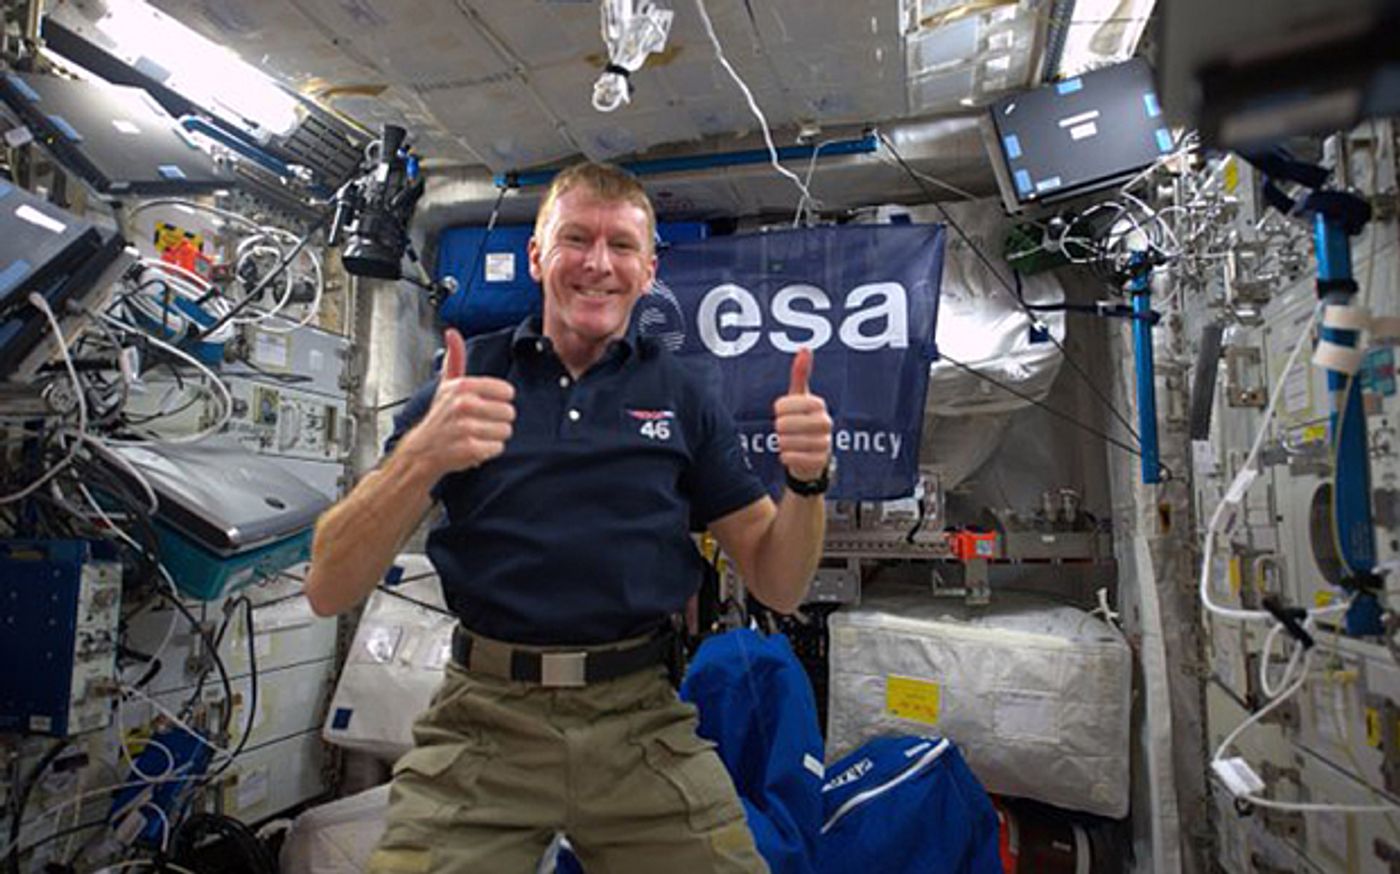 ESA astronaut Tim Peake will be returning to Earth this weekend after a 6-month stay in space.